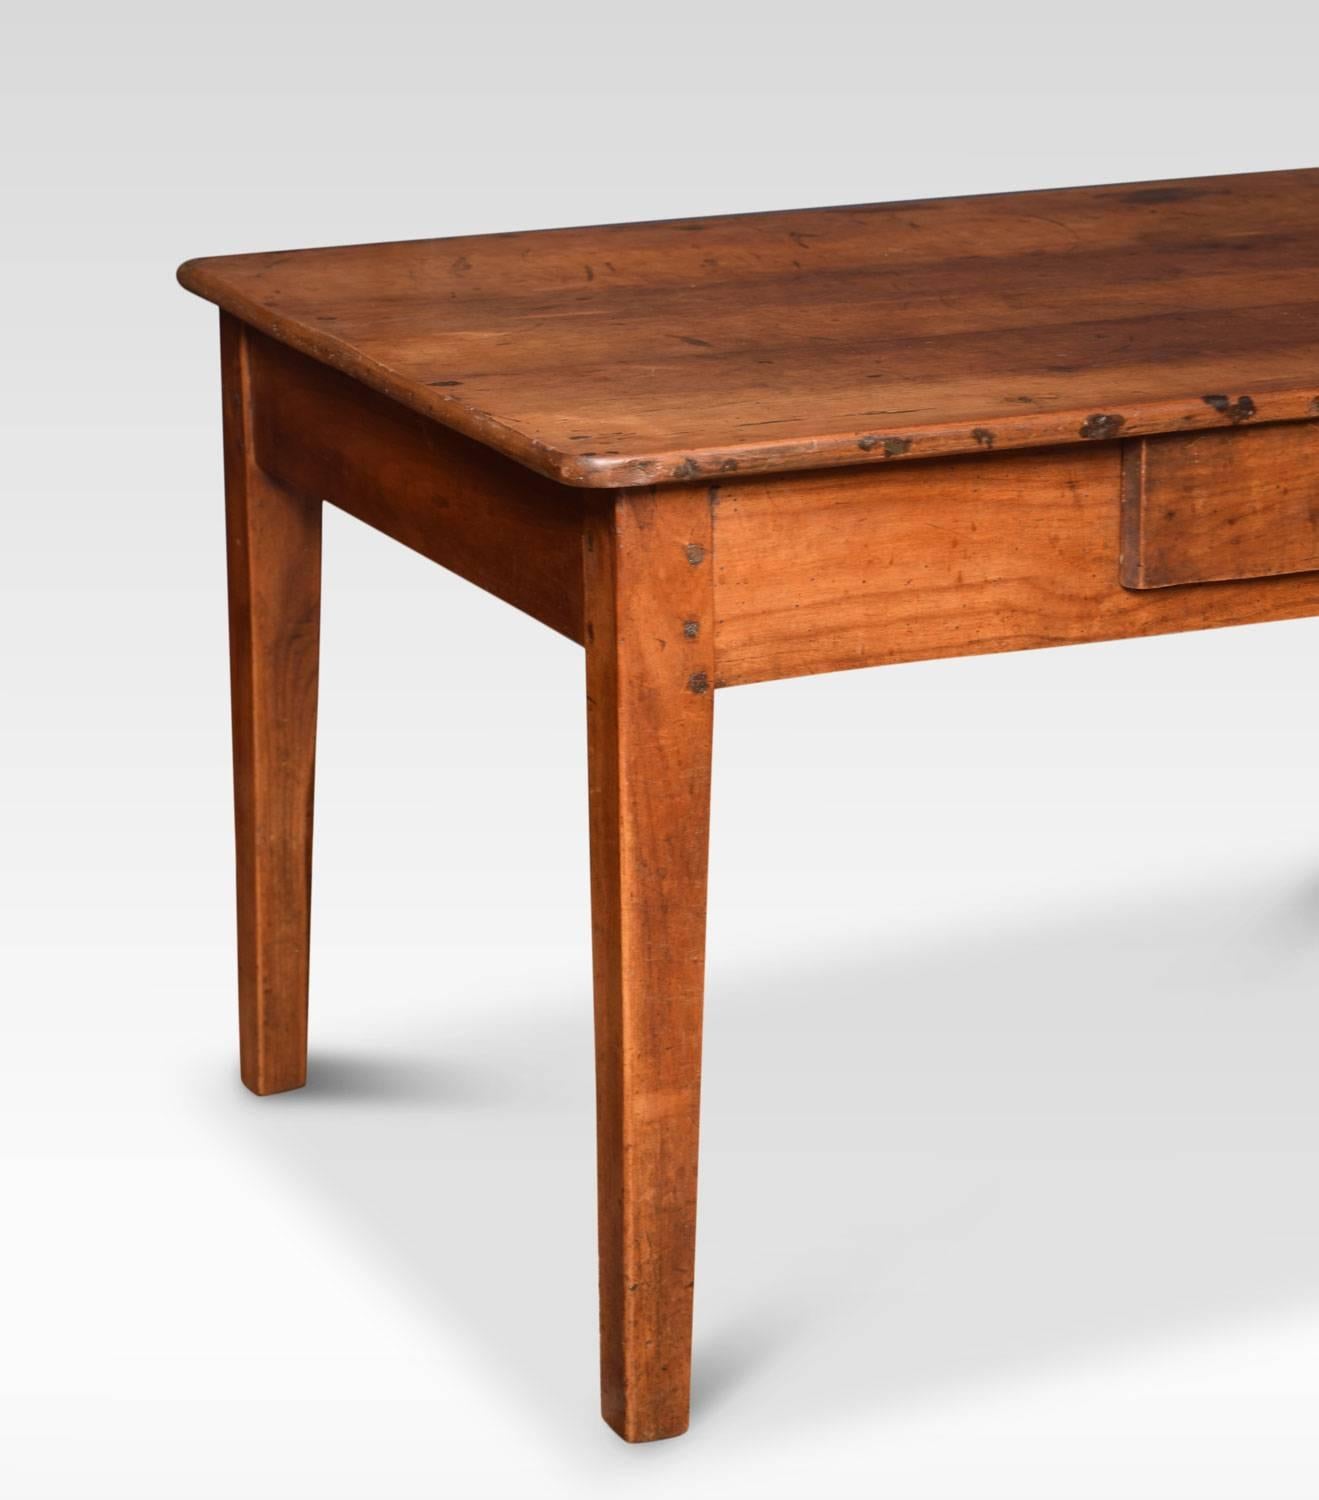 19th century elm coffee table, the plank top fitted with a single frieze draw, raised on tapered square section legs. (Adapted)
Dimensions:
Height 21 inches
Width 37 inches
Depth 25 inches.